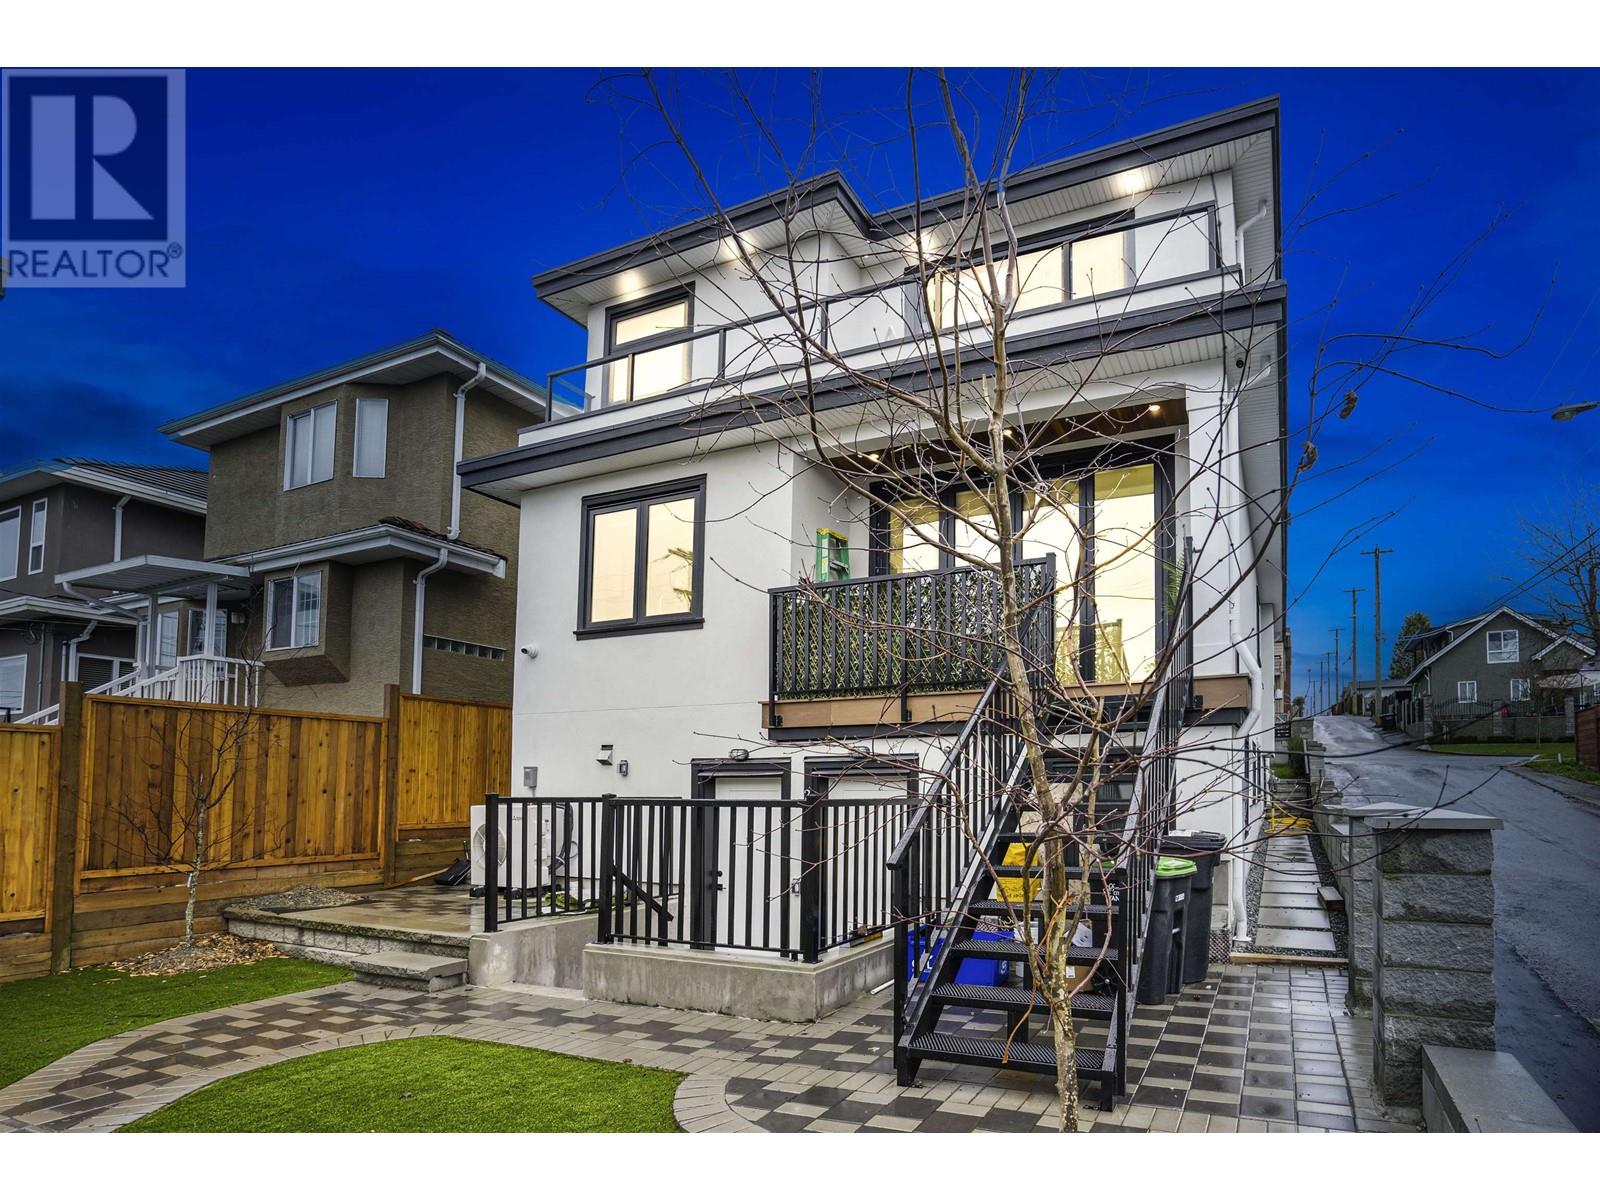 Listing Picture 33 of 39 : 2811 E 23RD AVENUE, Vancouver / 溫哥華 - 魯藝地產 Yvonne Lu Group - MLS Medallion Club Member